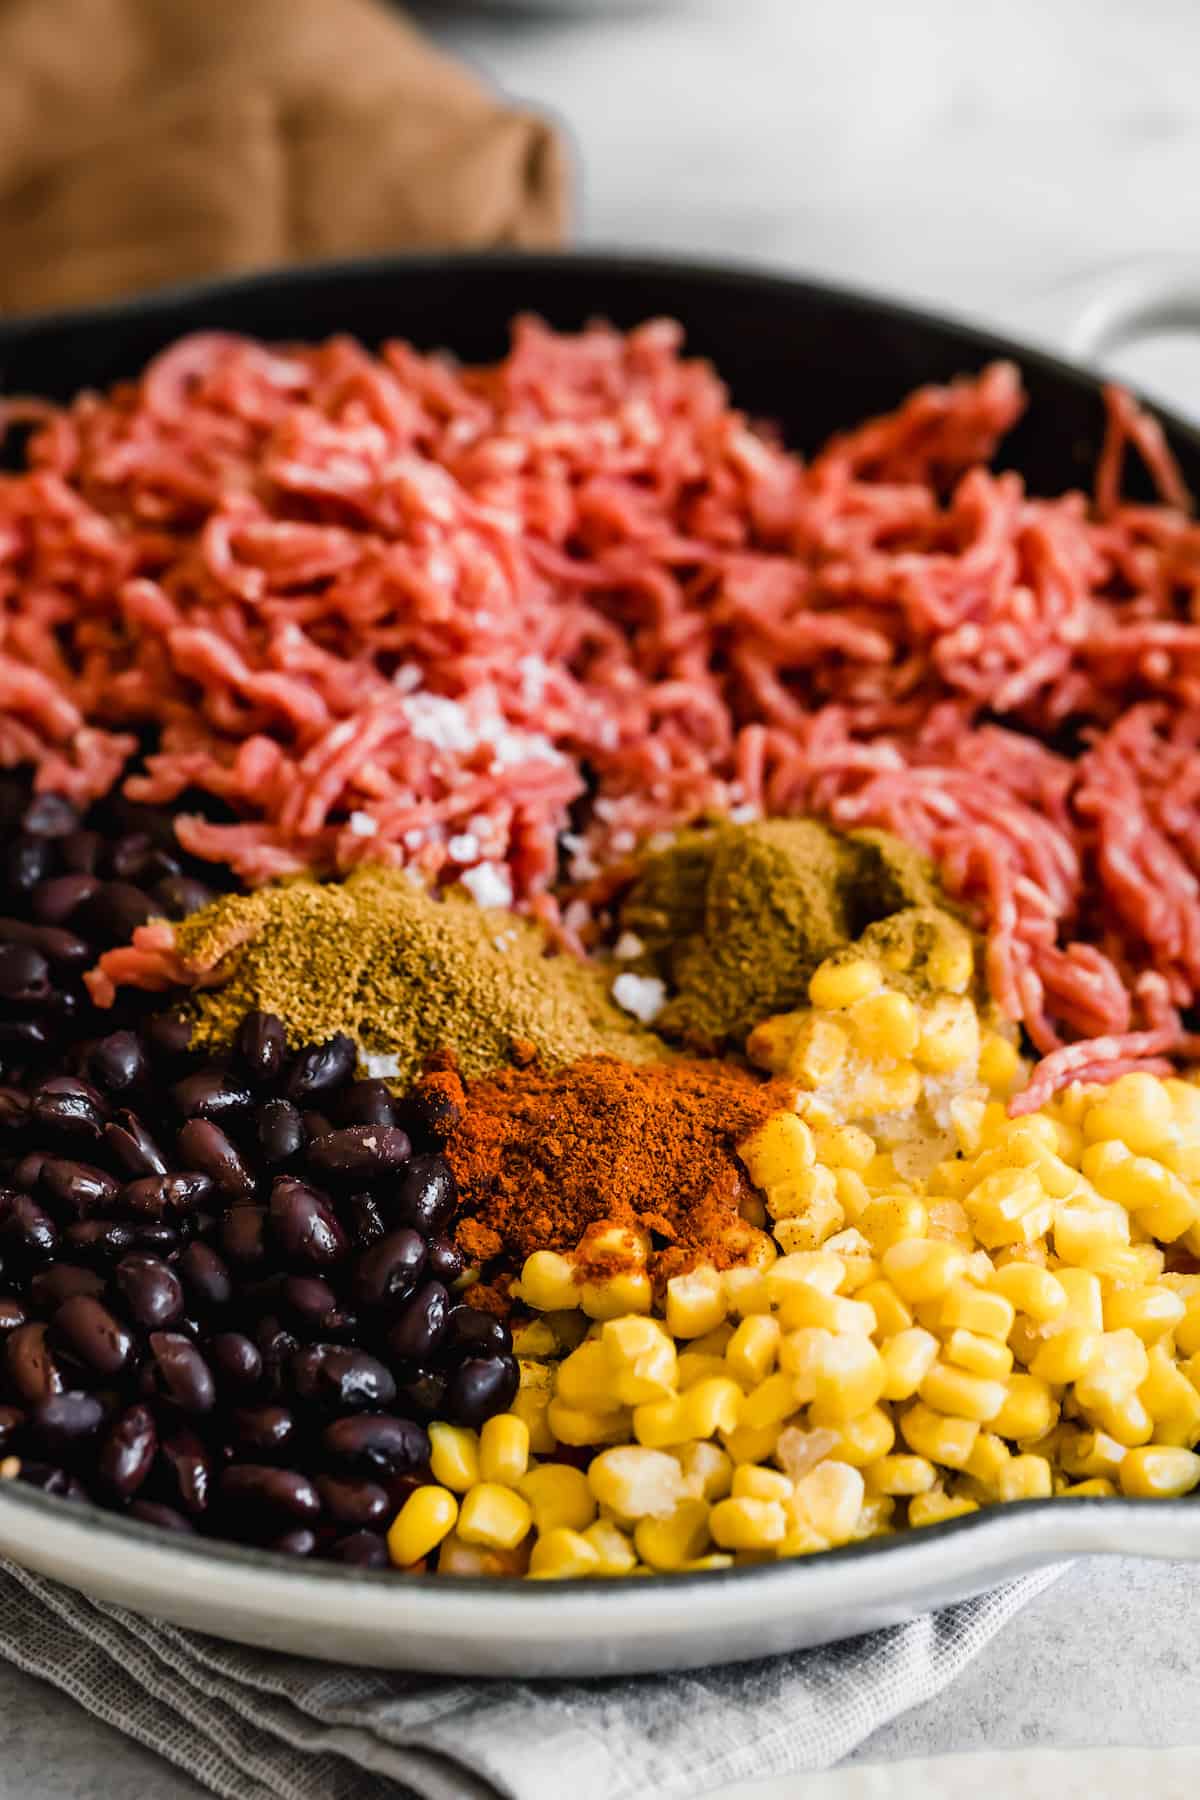 Corn, Ground Beef and Black Beans in a Skillet with Mexican Spices